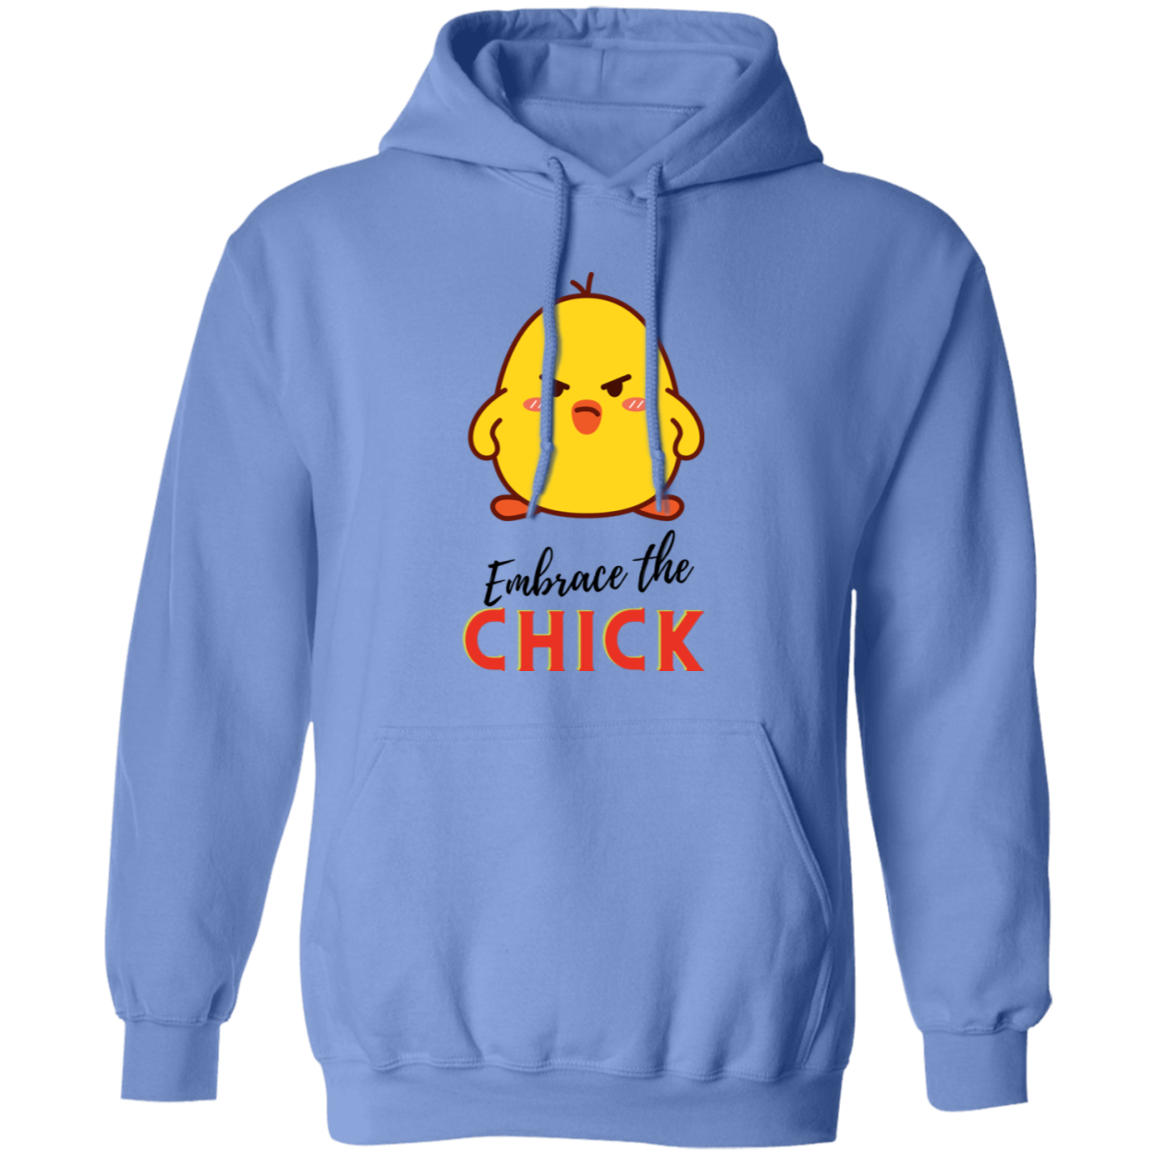 Embrace The Chick - Women's, Ladies' Pullover Hoodie